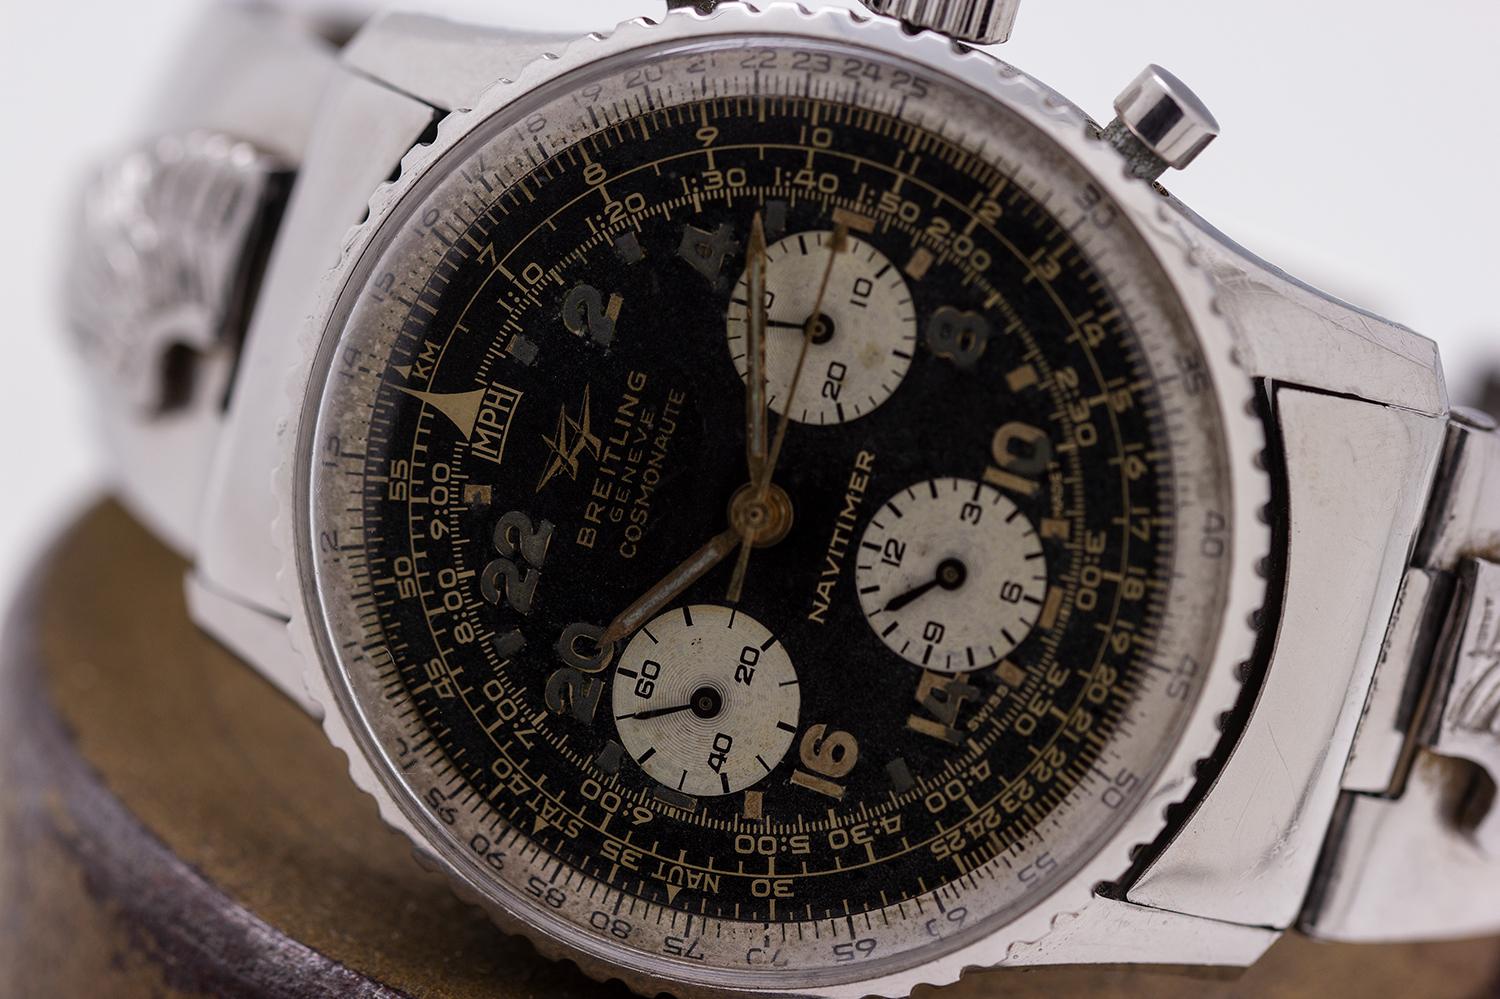 Men's Breitling Stainless Steel Navitimer Cosmonaute Manual Wristwatch Ref 806, c 1965 For Sale